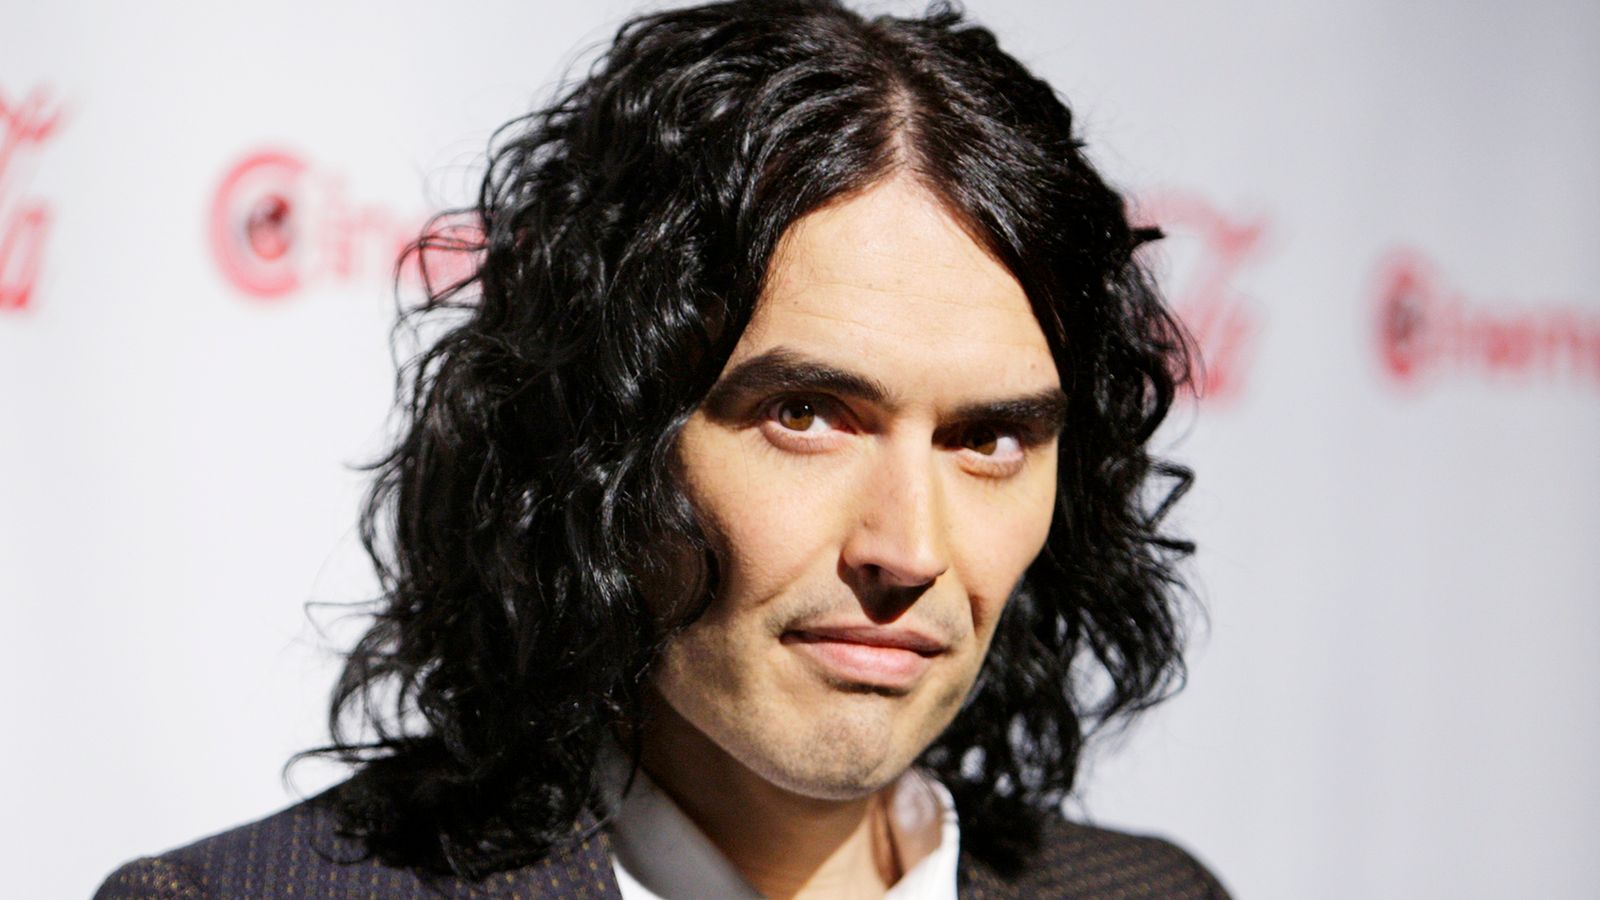 Russell Brand allegations show how 'terrible behaviour towards women was tolerated' in TV, says Channel 4 boss